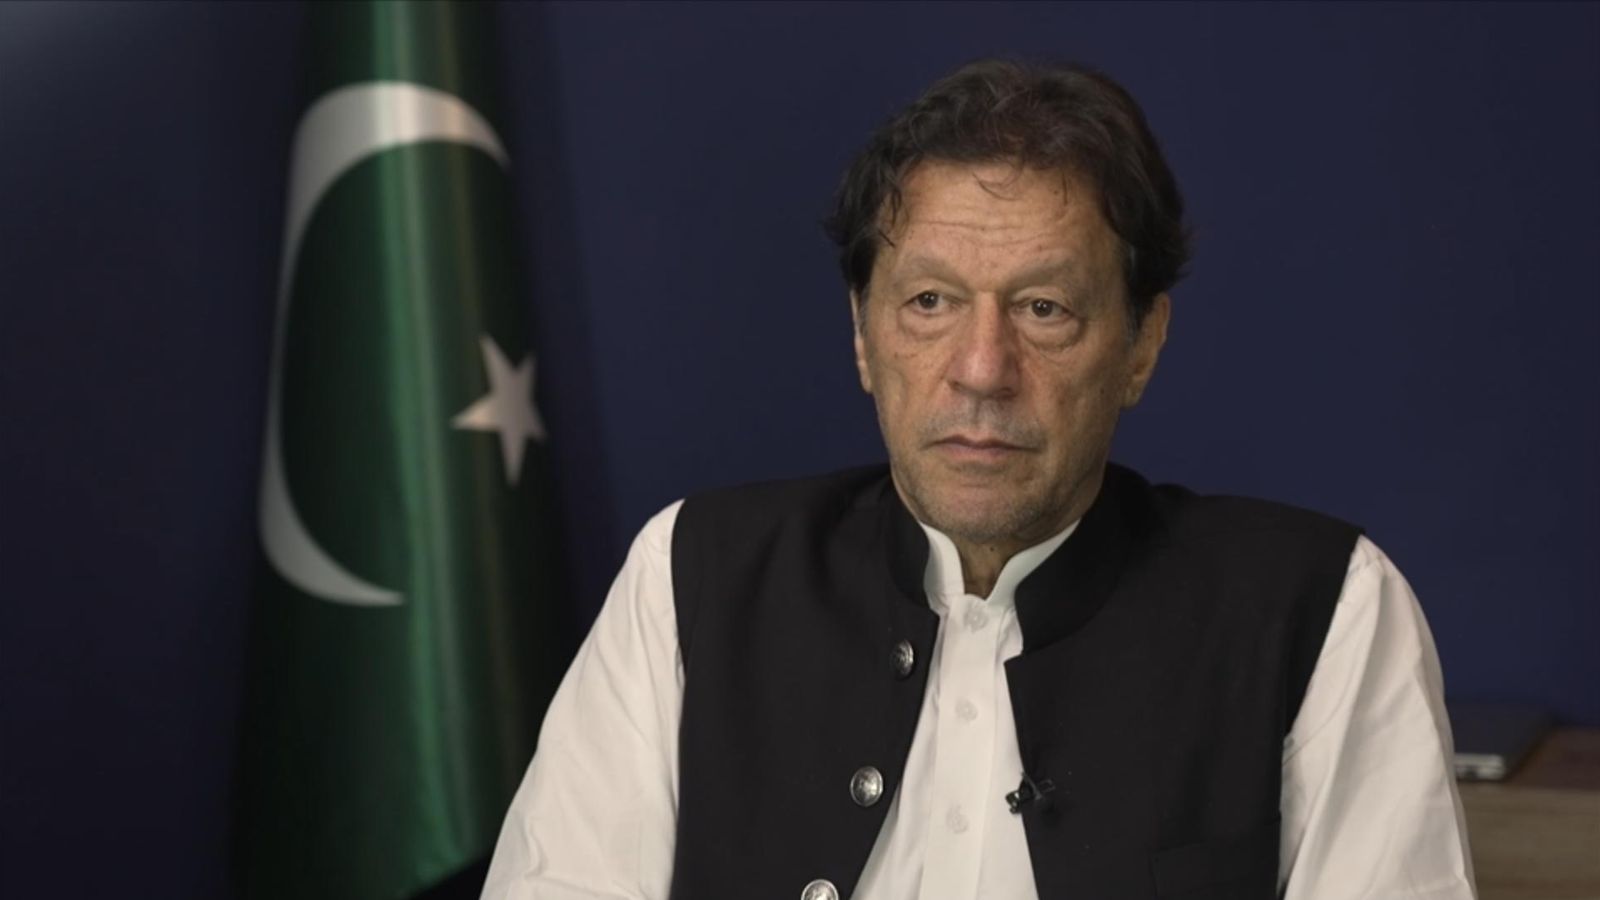 Pakistan's former prime minister Imran Khan says country's democracy at 'an all-time low'